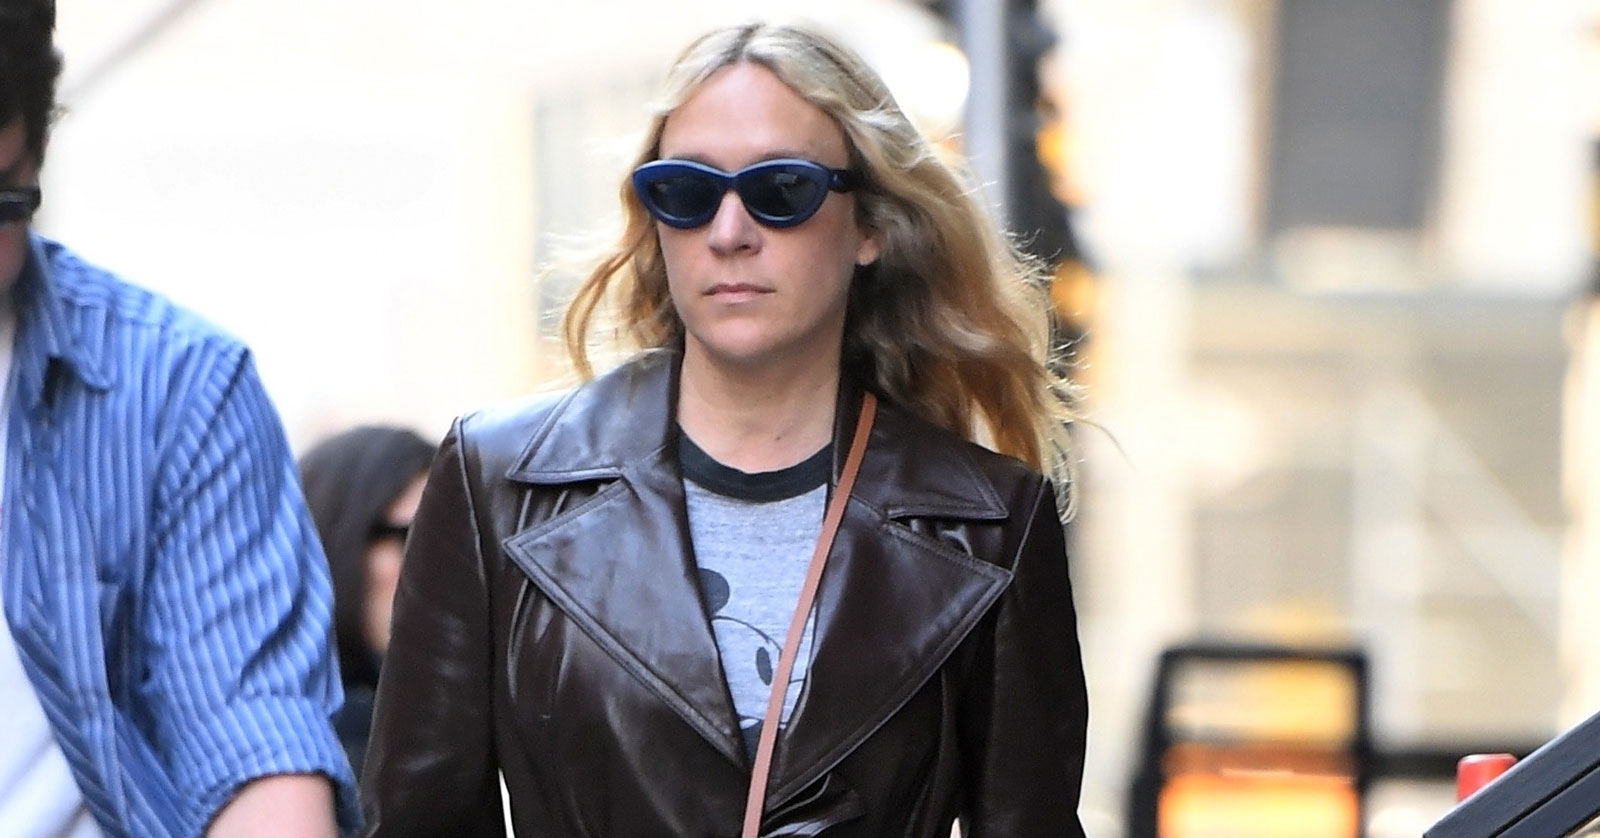 Chloë Sevigny wore the flat shoe trend I always wear at the airport